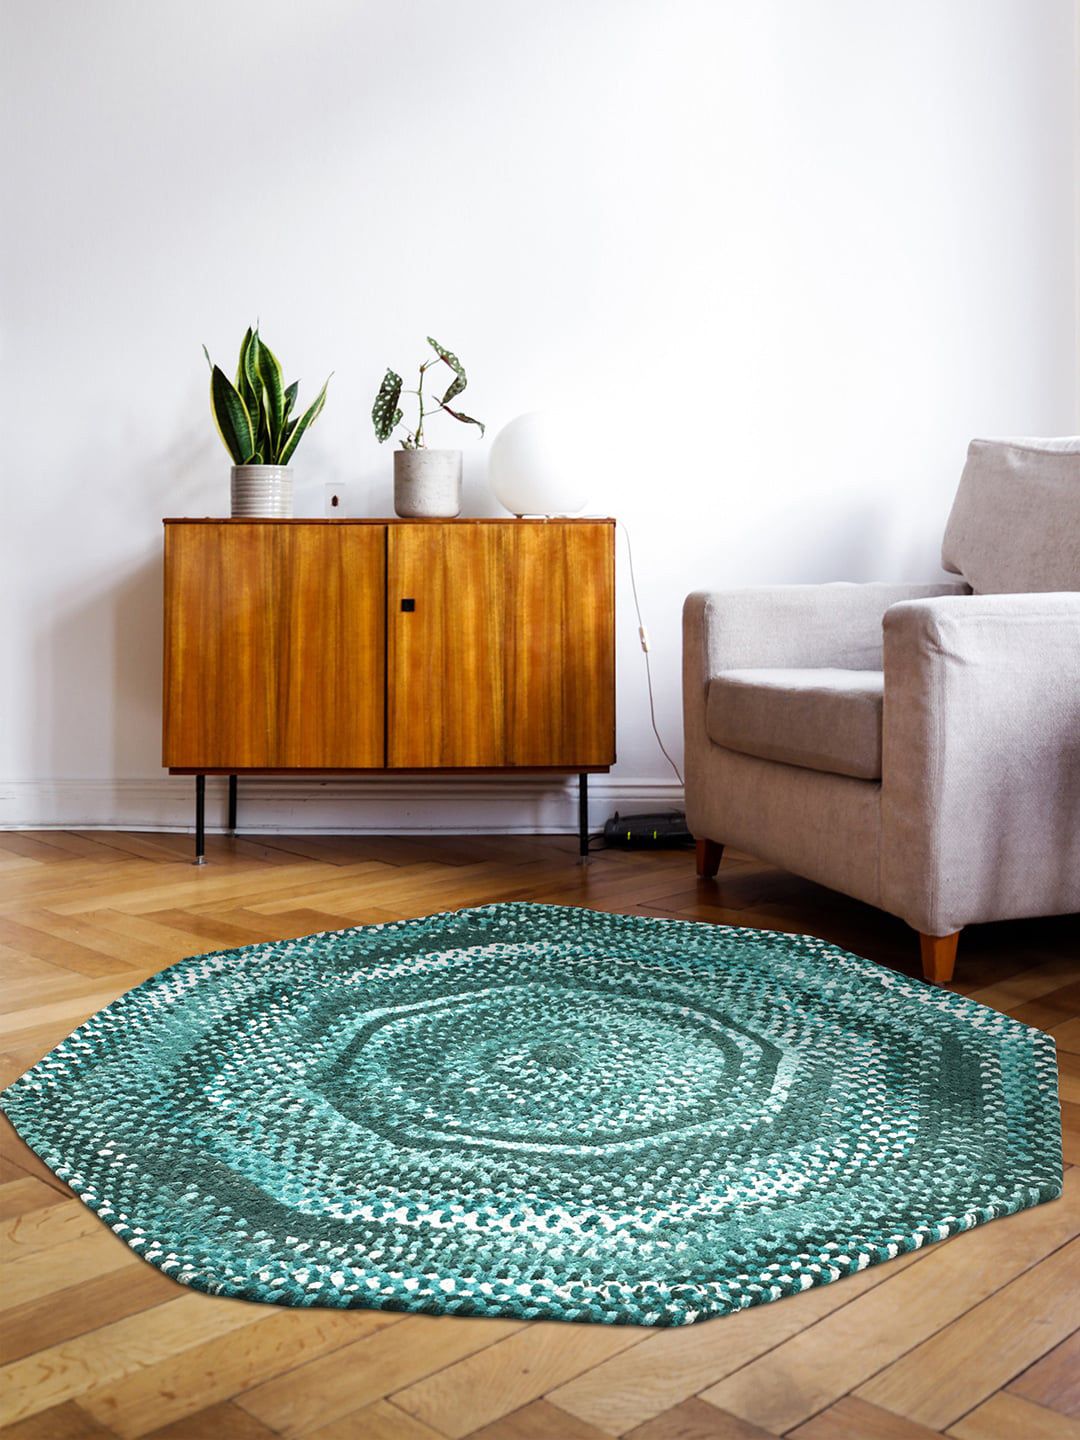 Pano Sea Green Braided Cotton Floor Rug 90 cm Price in India